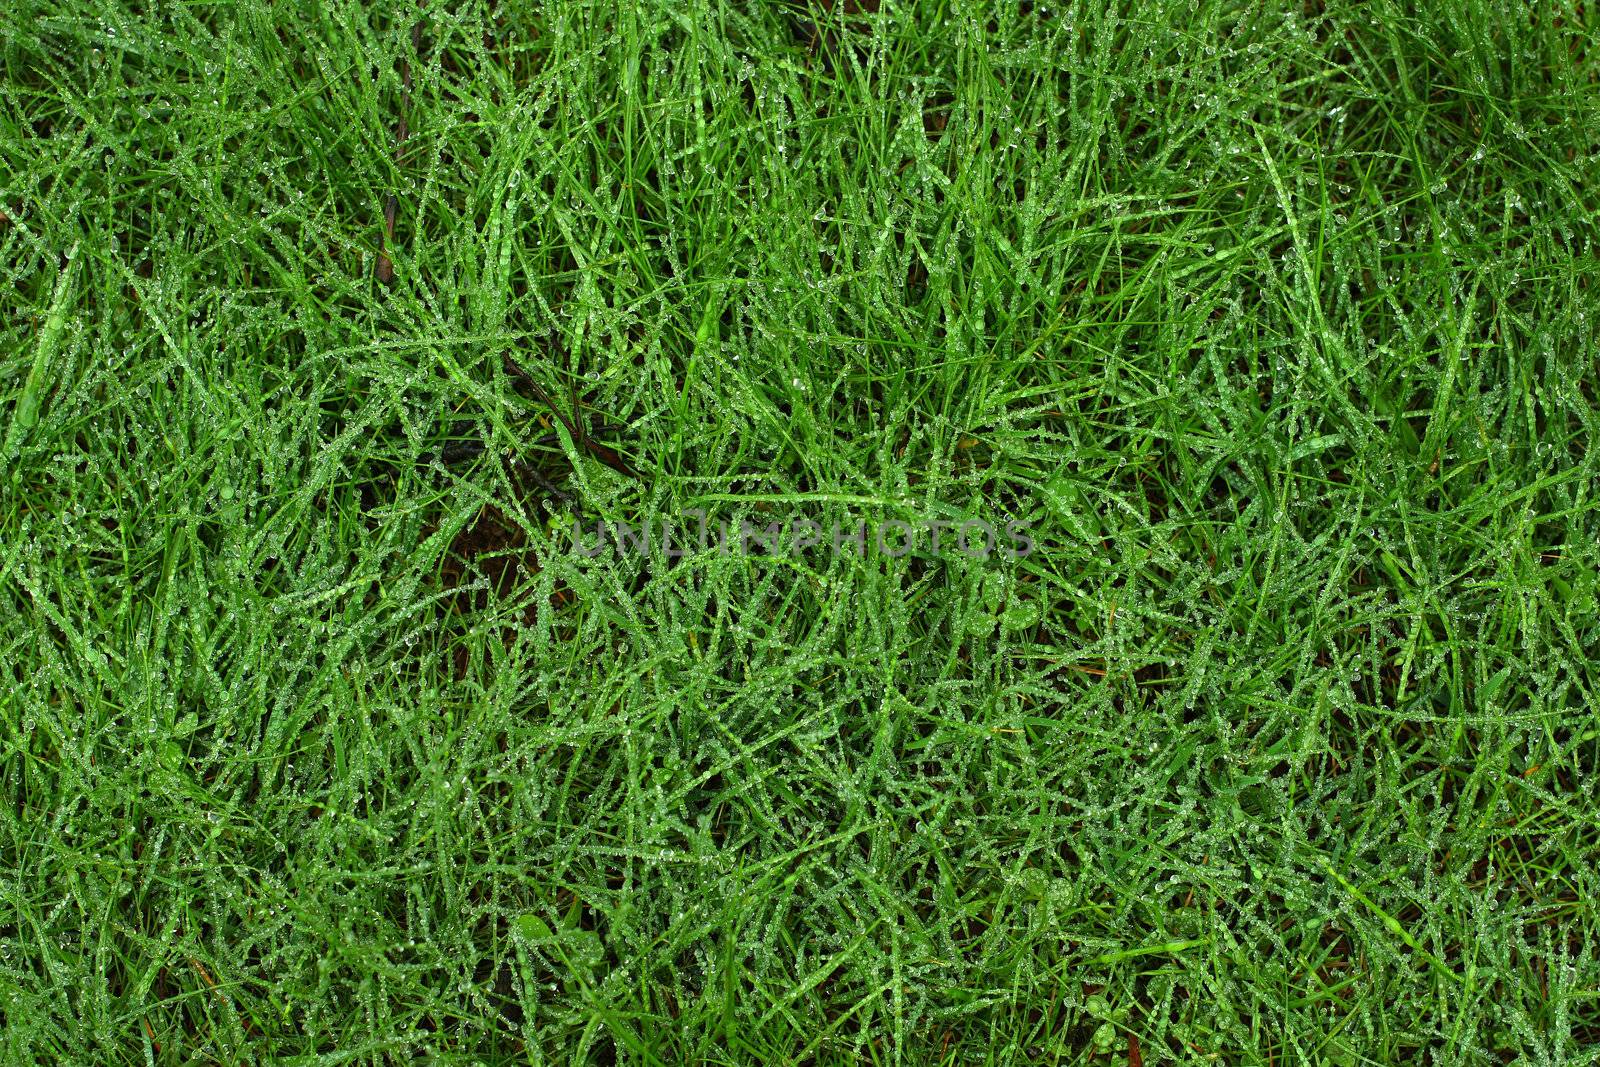 Real morning dew drops on green grass,great for backgrounds or freshness concept